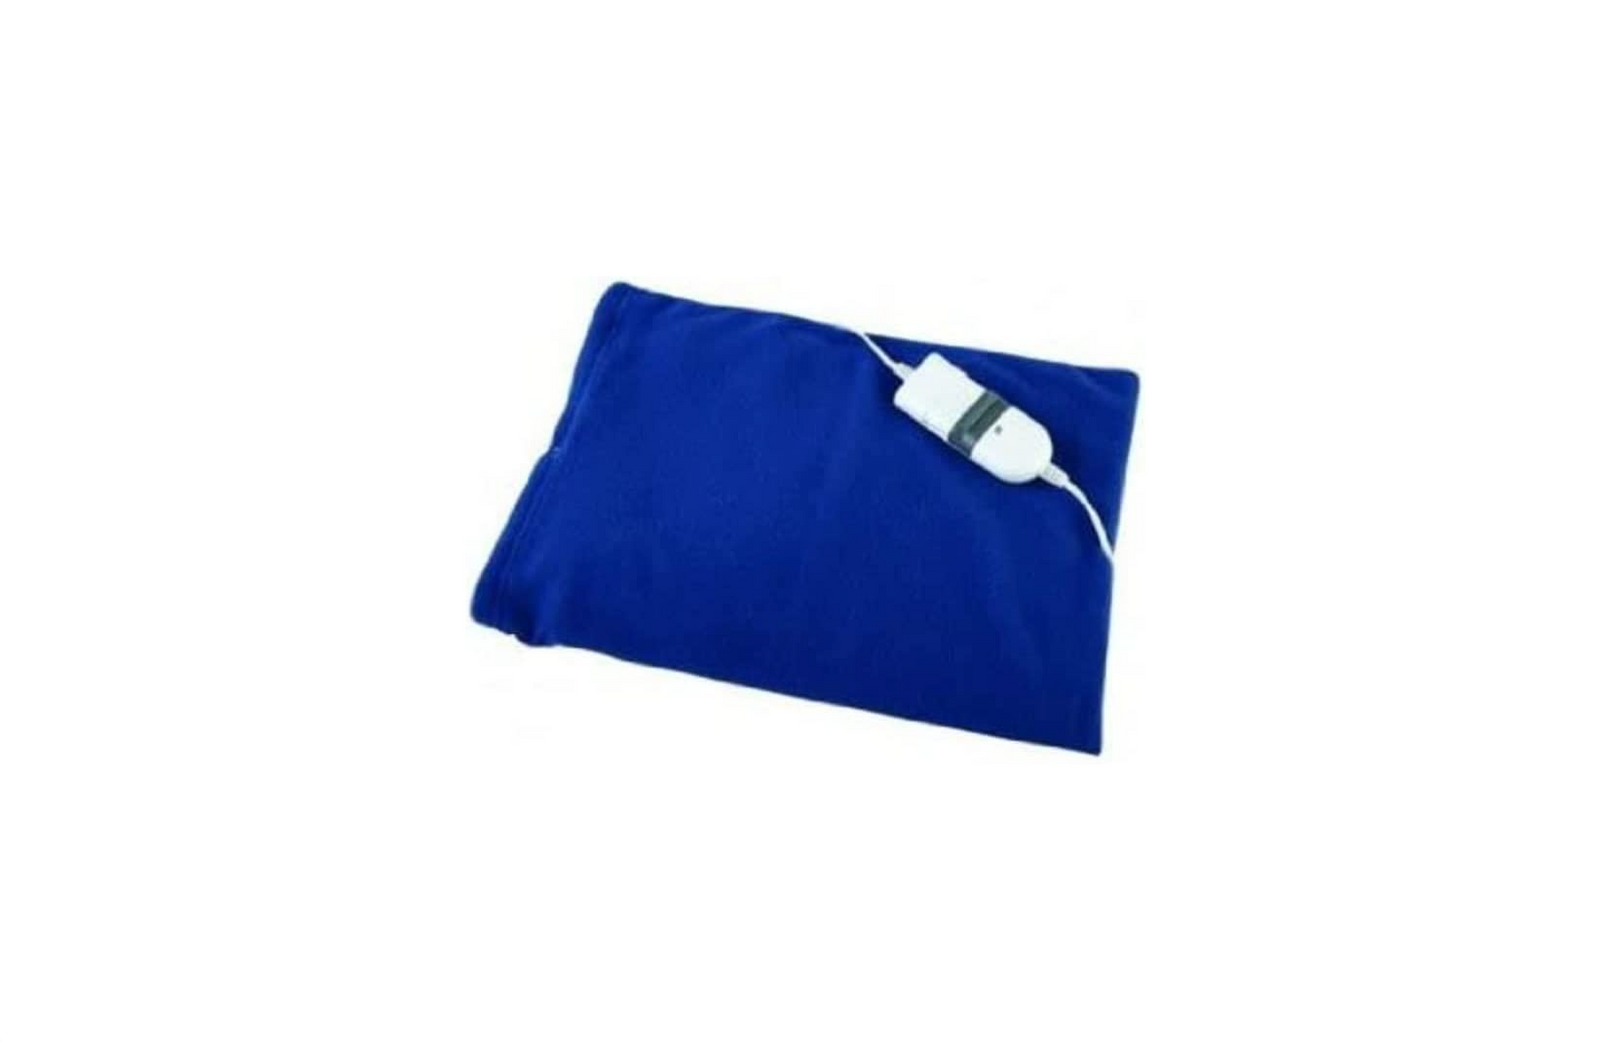 Enfa Classic electric pillow for physiotherapy, thermoregulation, 40 x 32 cm